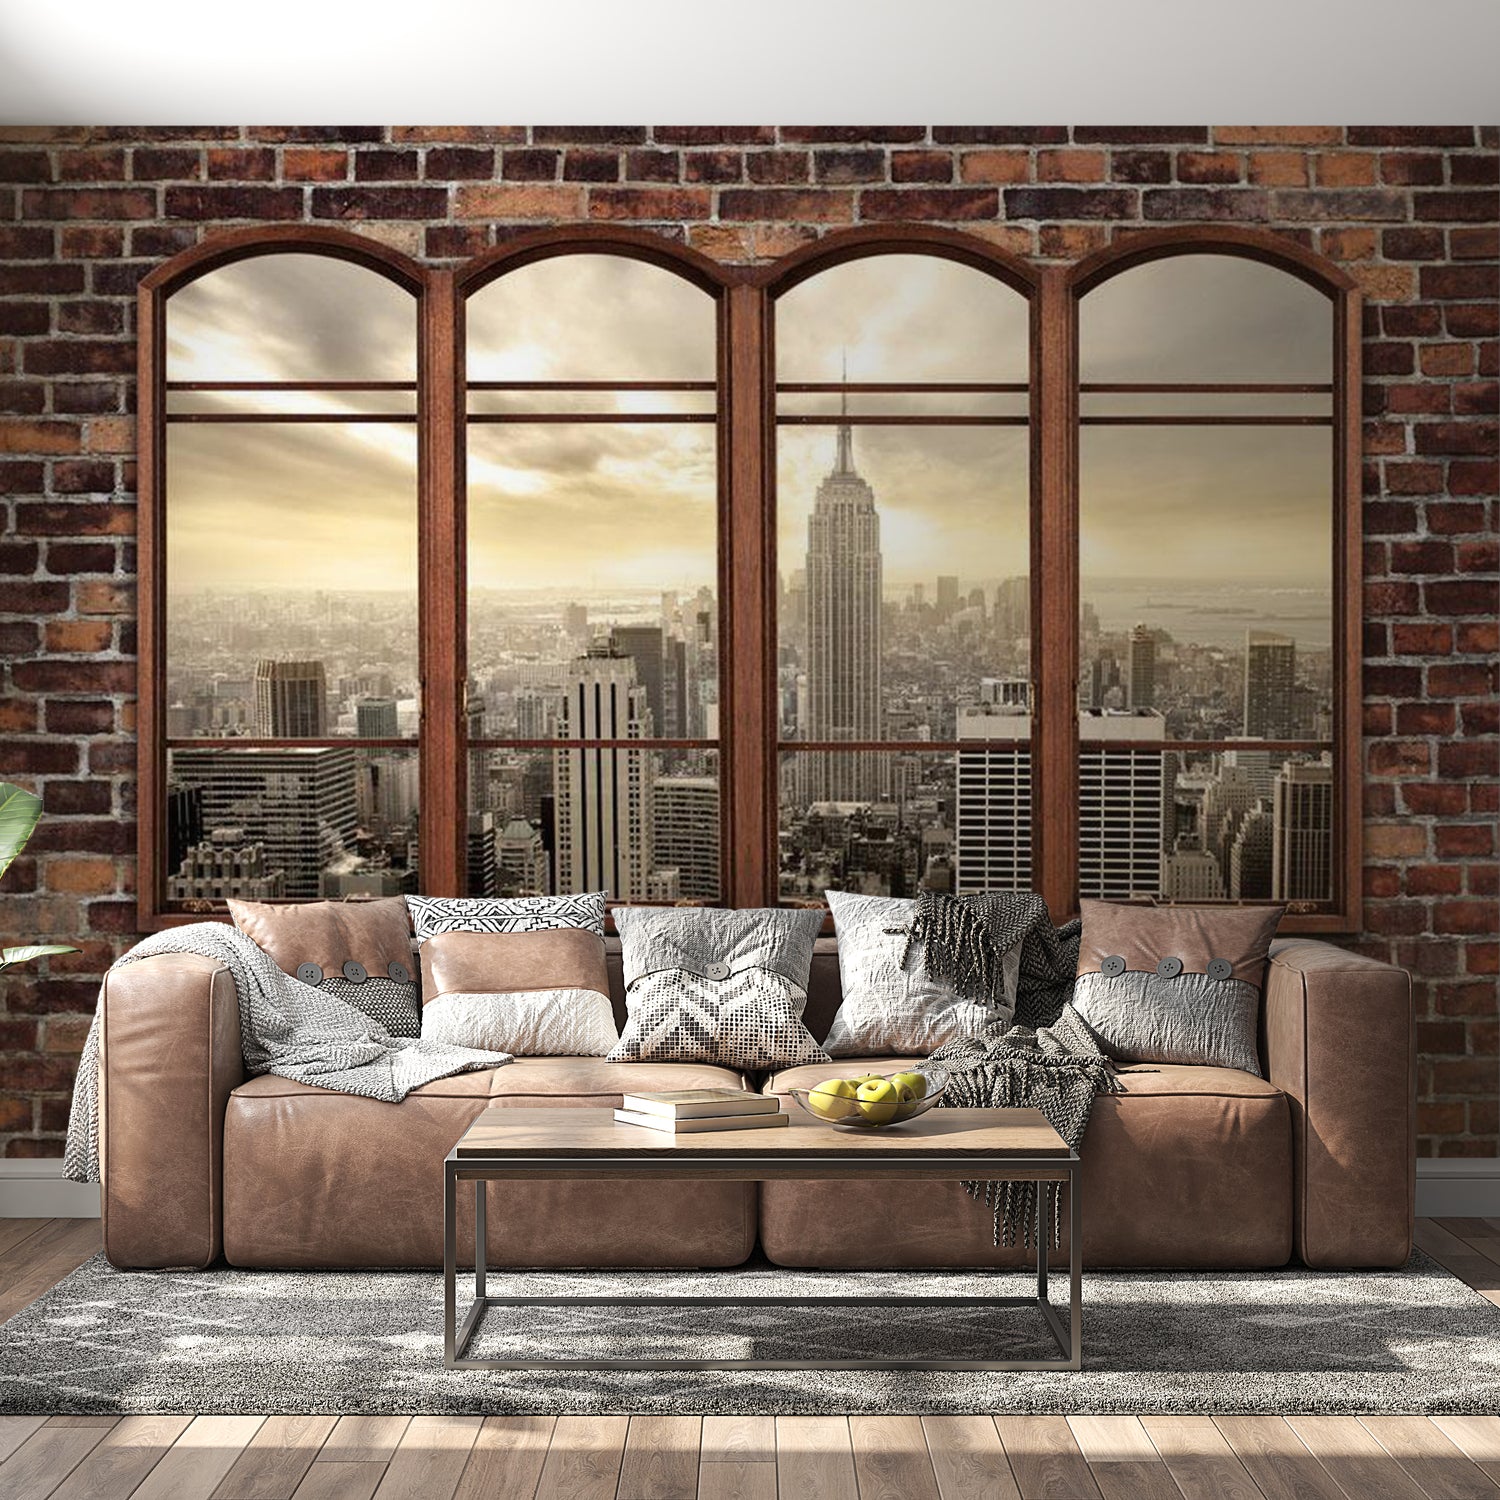 Peel & Stick Wall Mural - New York Window Brick Wall - Removable Wall Decals